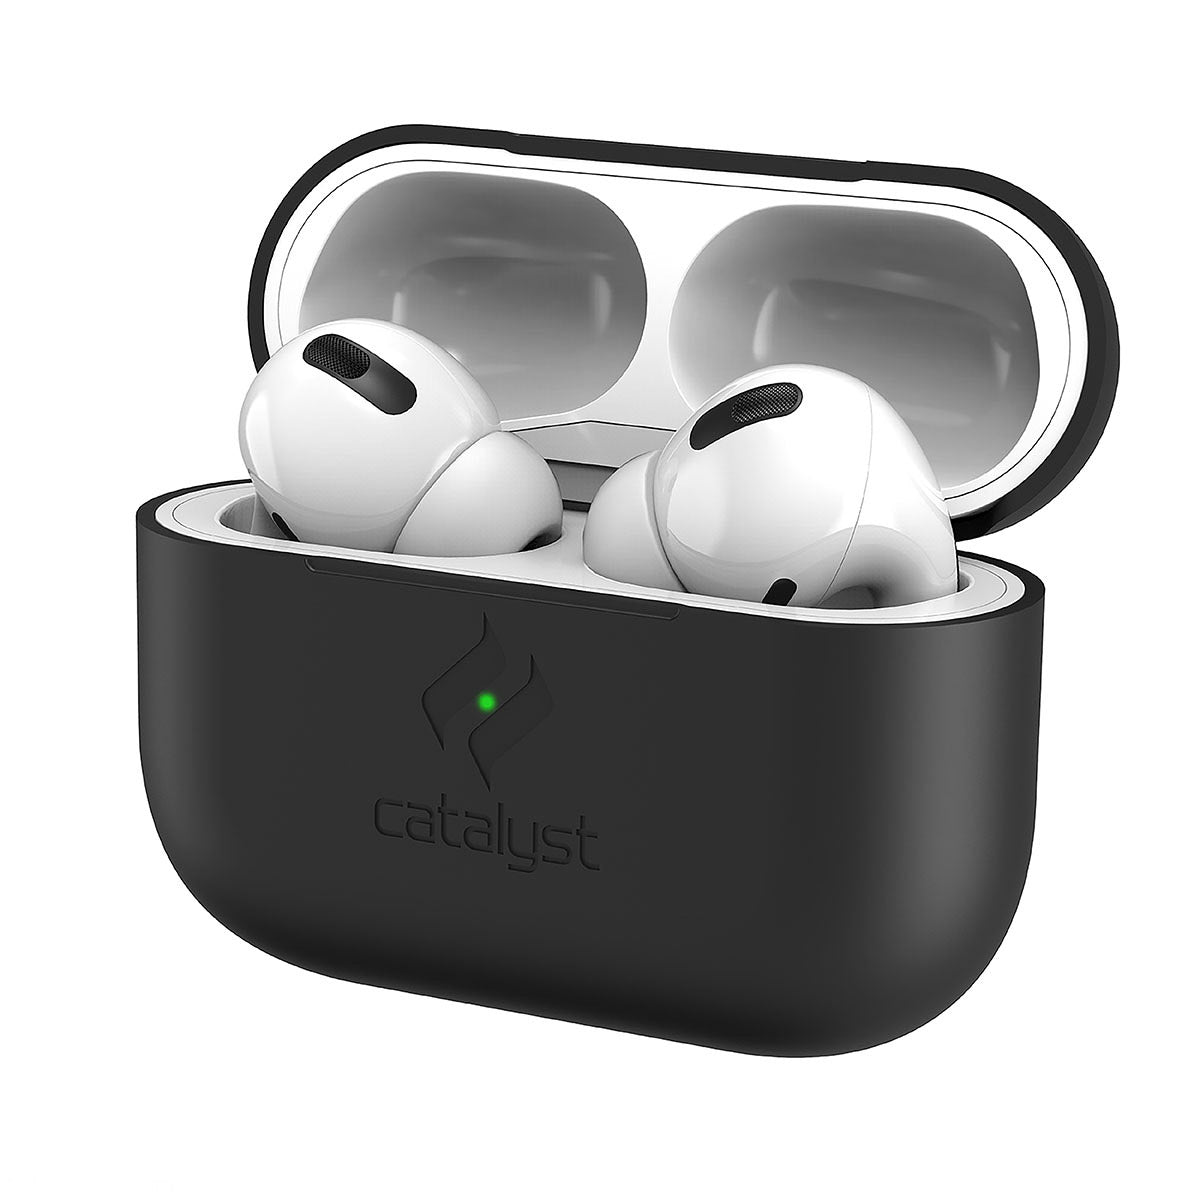 Catalyst airpods pro gen 2/1 slim case showing a closer look of front view of the case in stealth black colorway